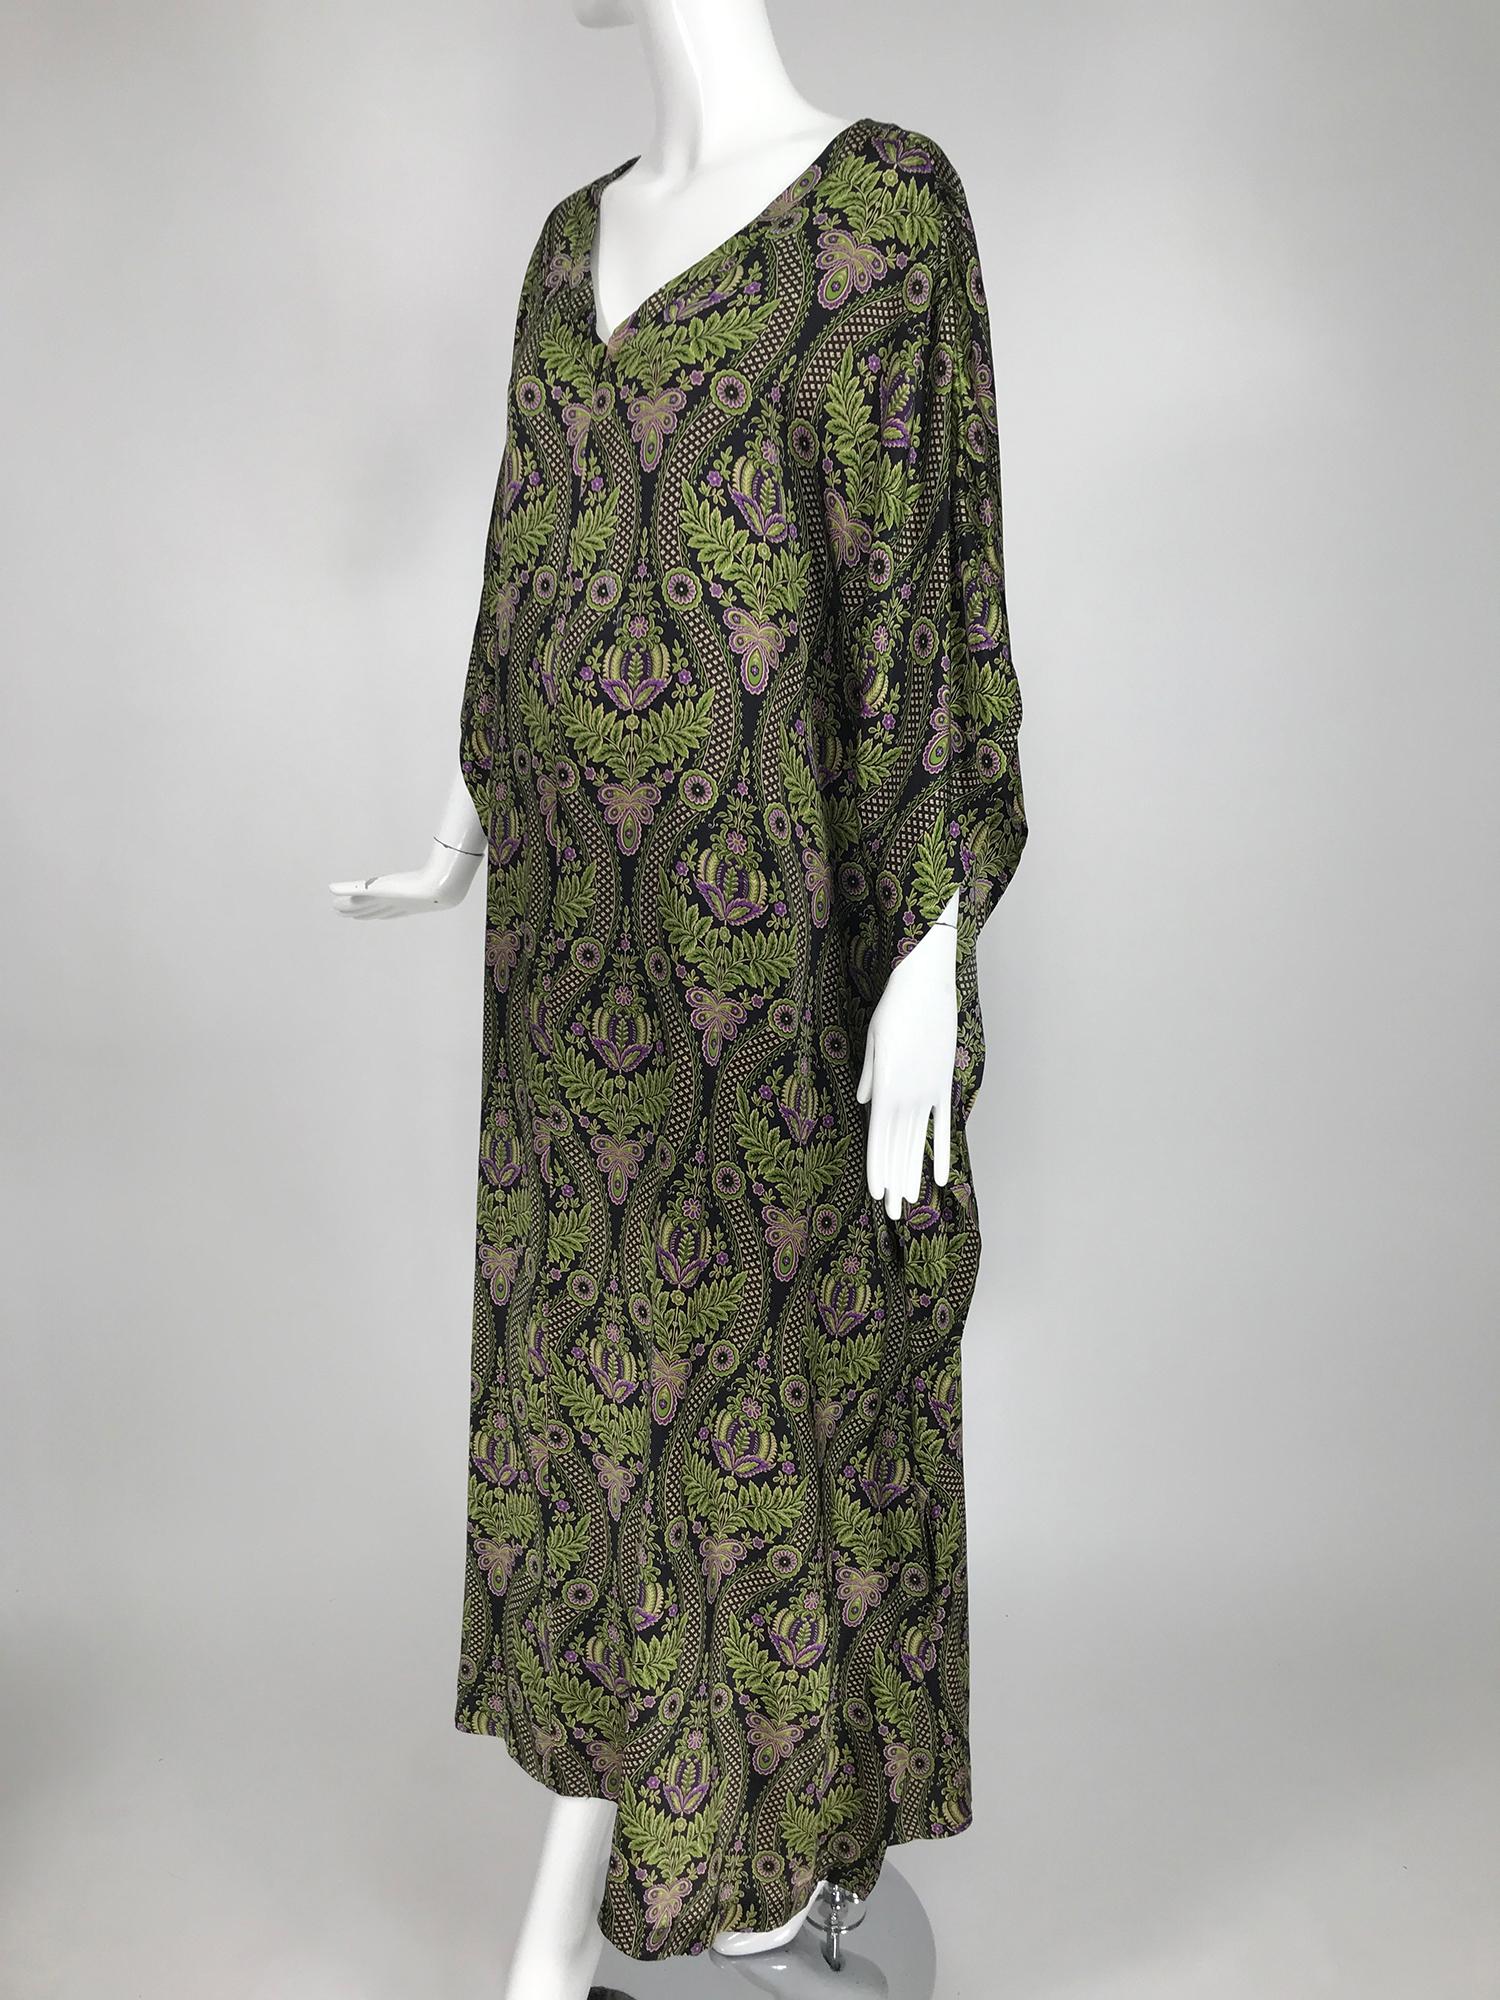 Neiman Marcus botanical printed silk satin caftan. Pull on caftan closes at the front with an invisible zipper. Beautiful and simple classic caftan style. Marked size XL.
     In excellent wearable condition.  All our clothing is dry cleaned and